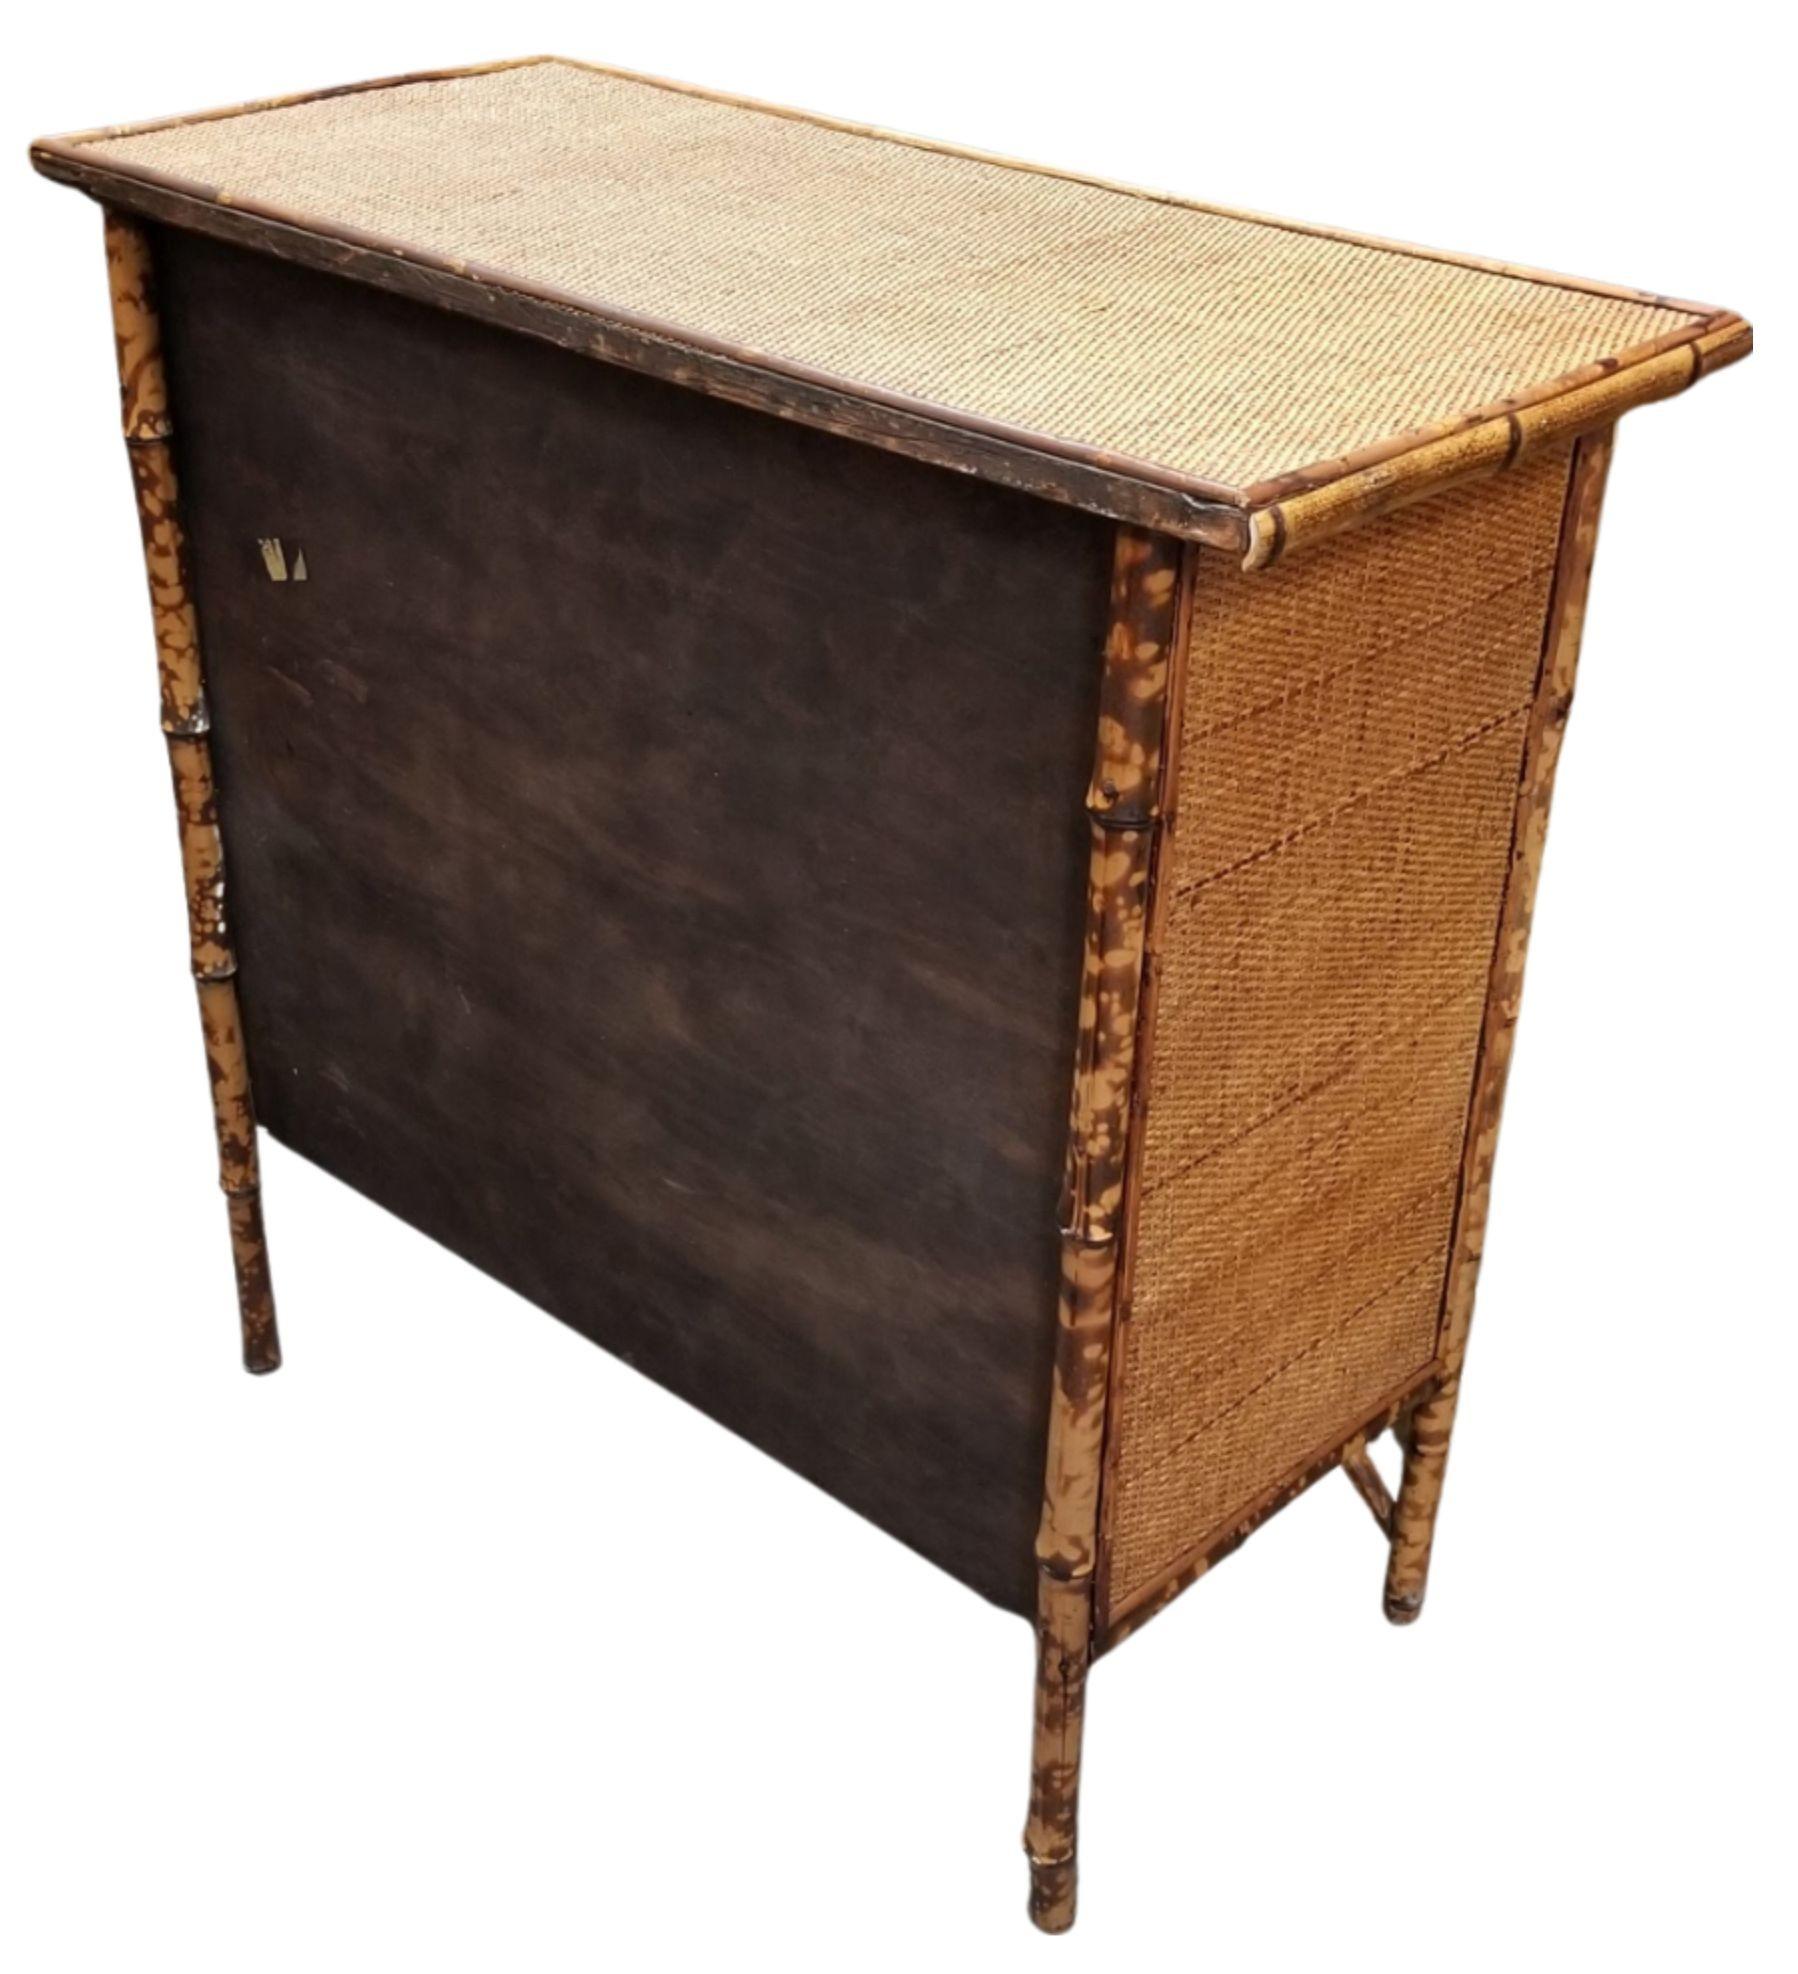 Turn-of-the-century Tiger Bamboo dresser of the Aesthetic Movement era with handwoven rice mat tops and sides and Tiger Bamboo also known as 